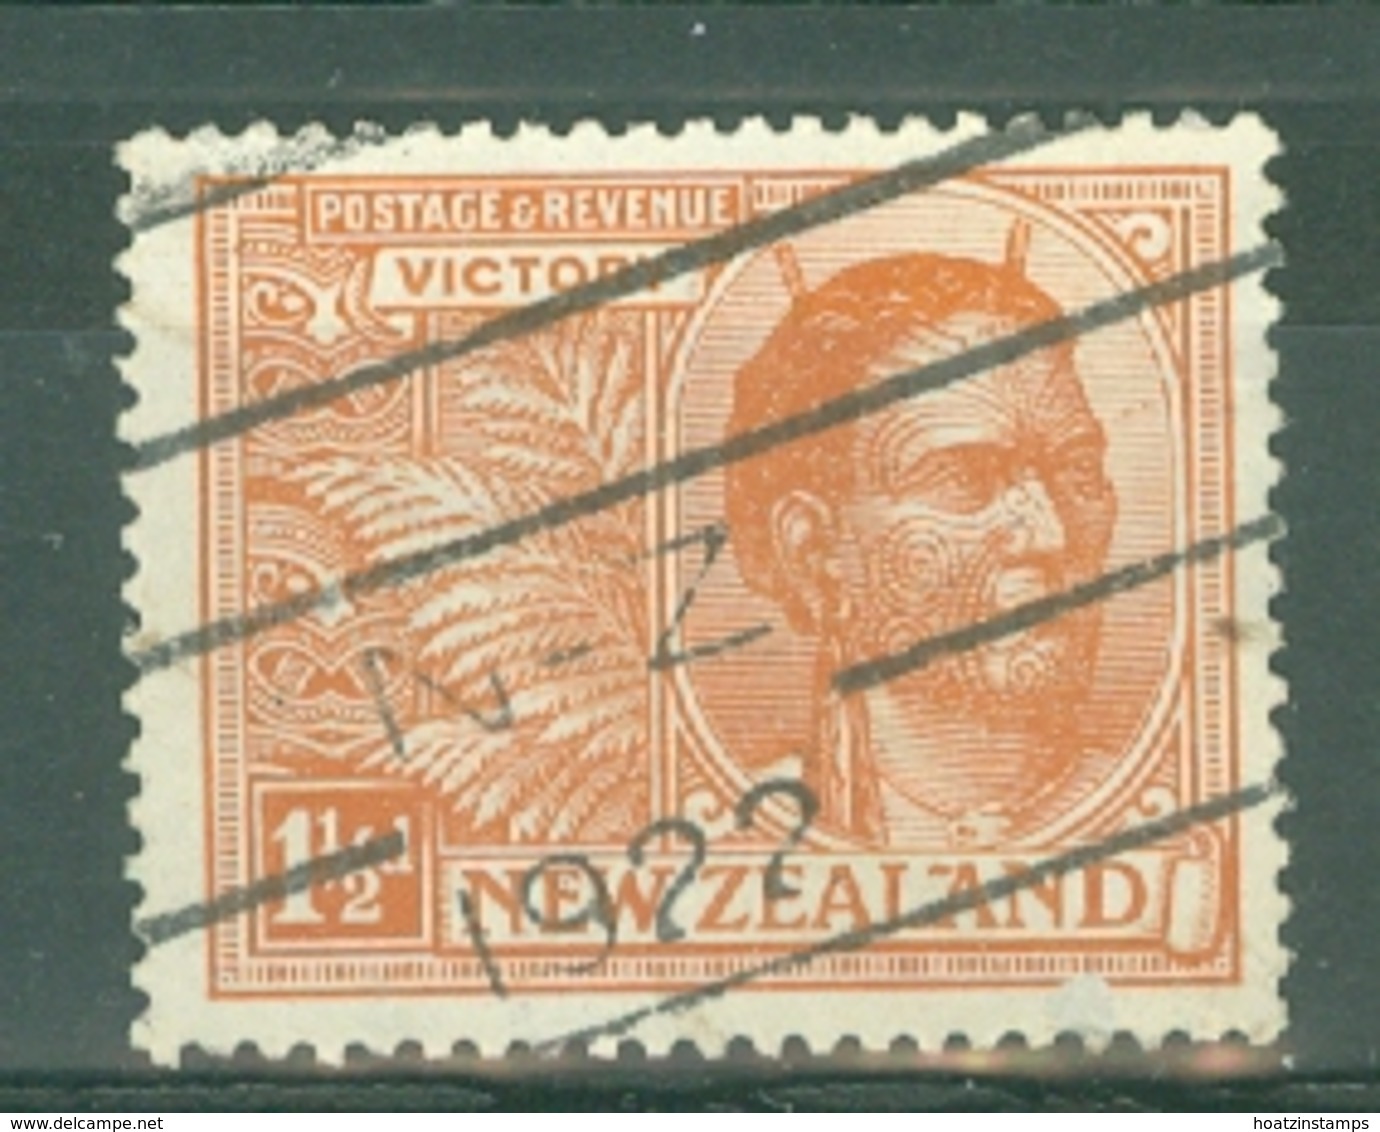 New Zealand: 1920   Victory     SG455     1½d    Used - Used Stamps